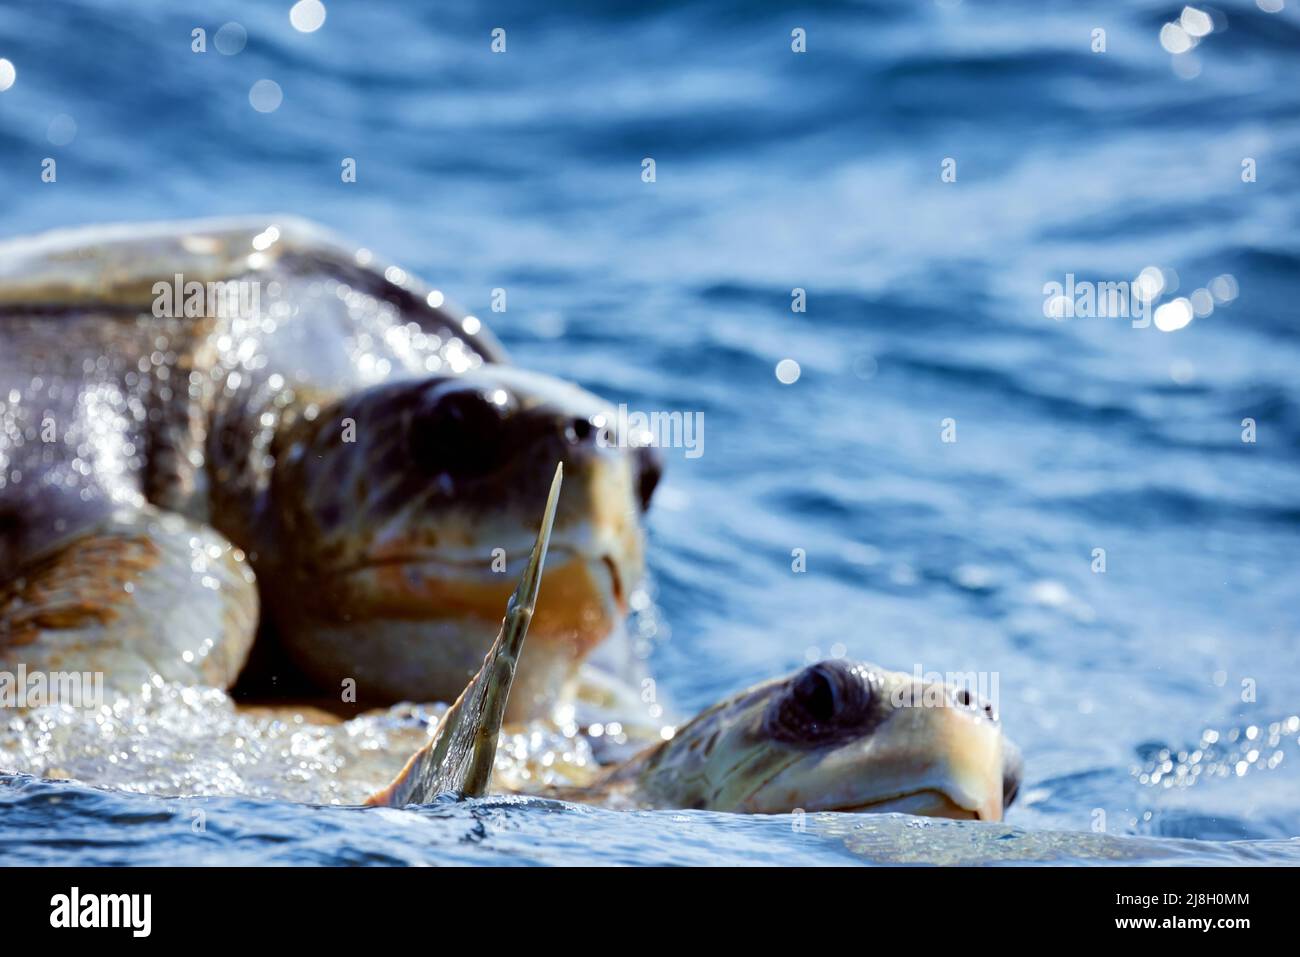 Mating of sea turtles in the open ocean. Olive ridley sea turtles or Lepidochelys olivacea during the mating games. The life of marine reptiles. Stock Photo